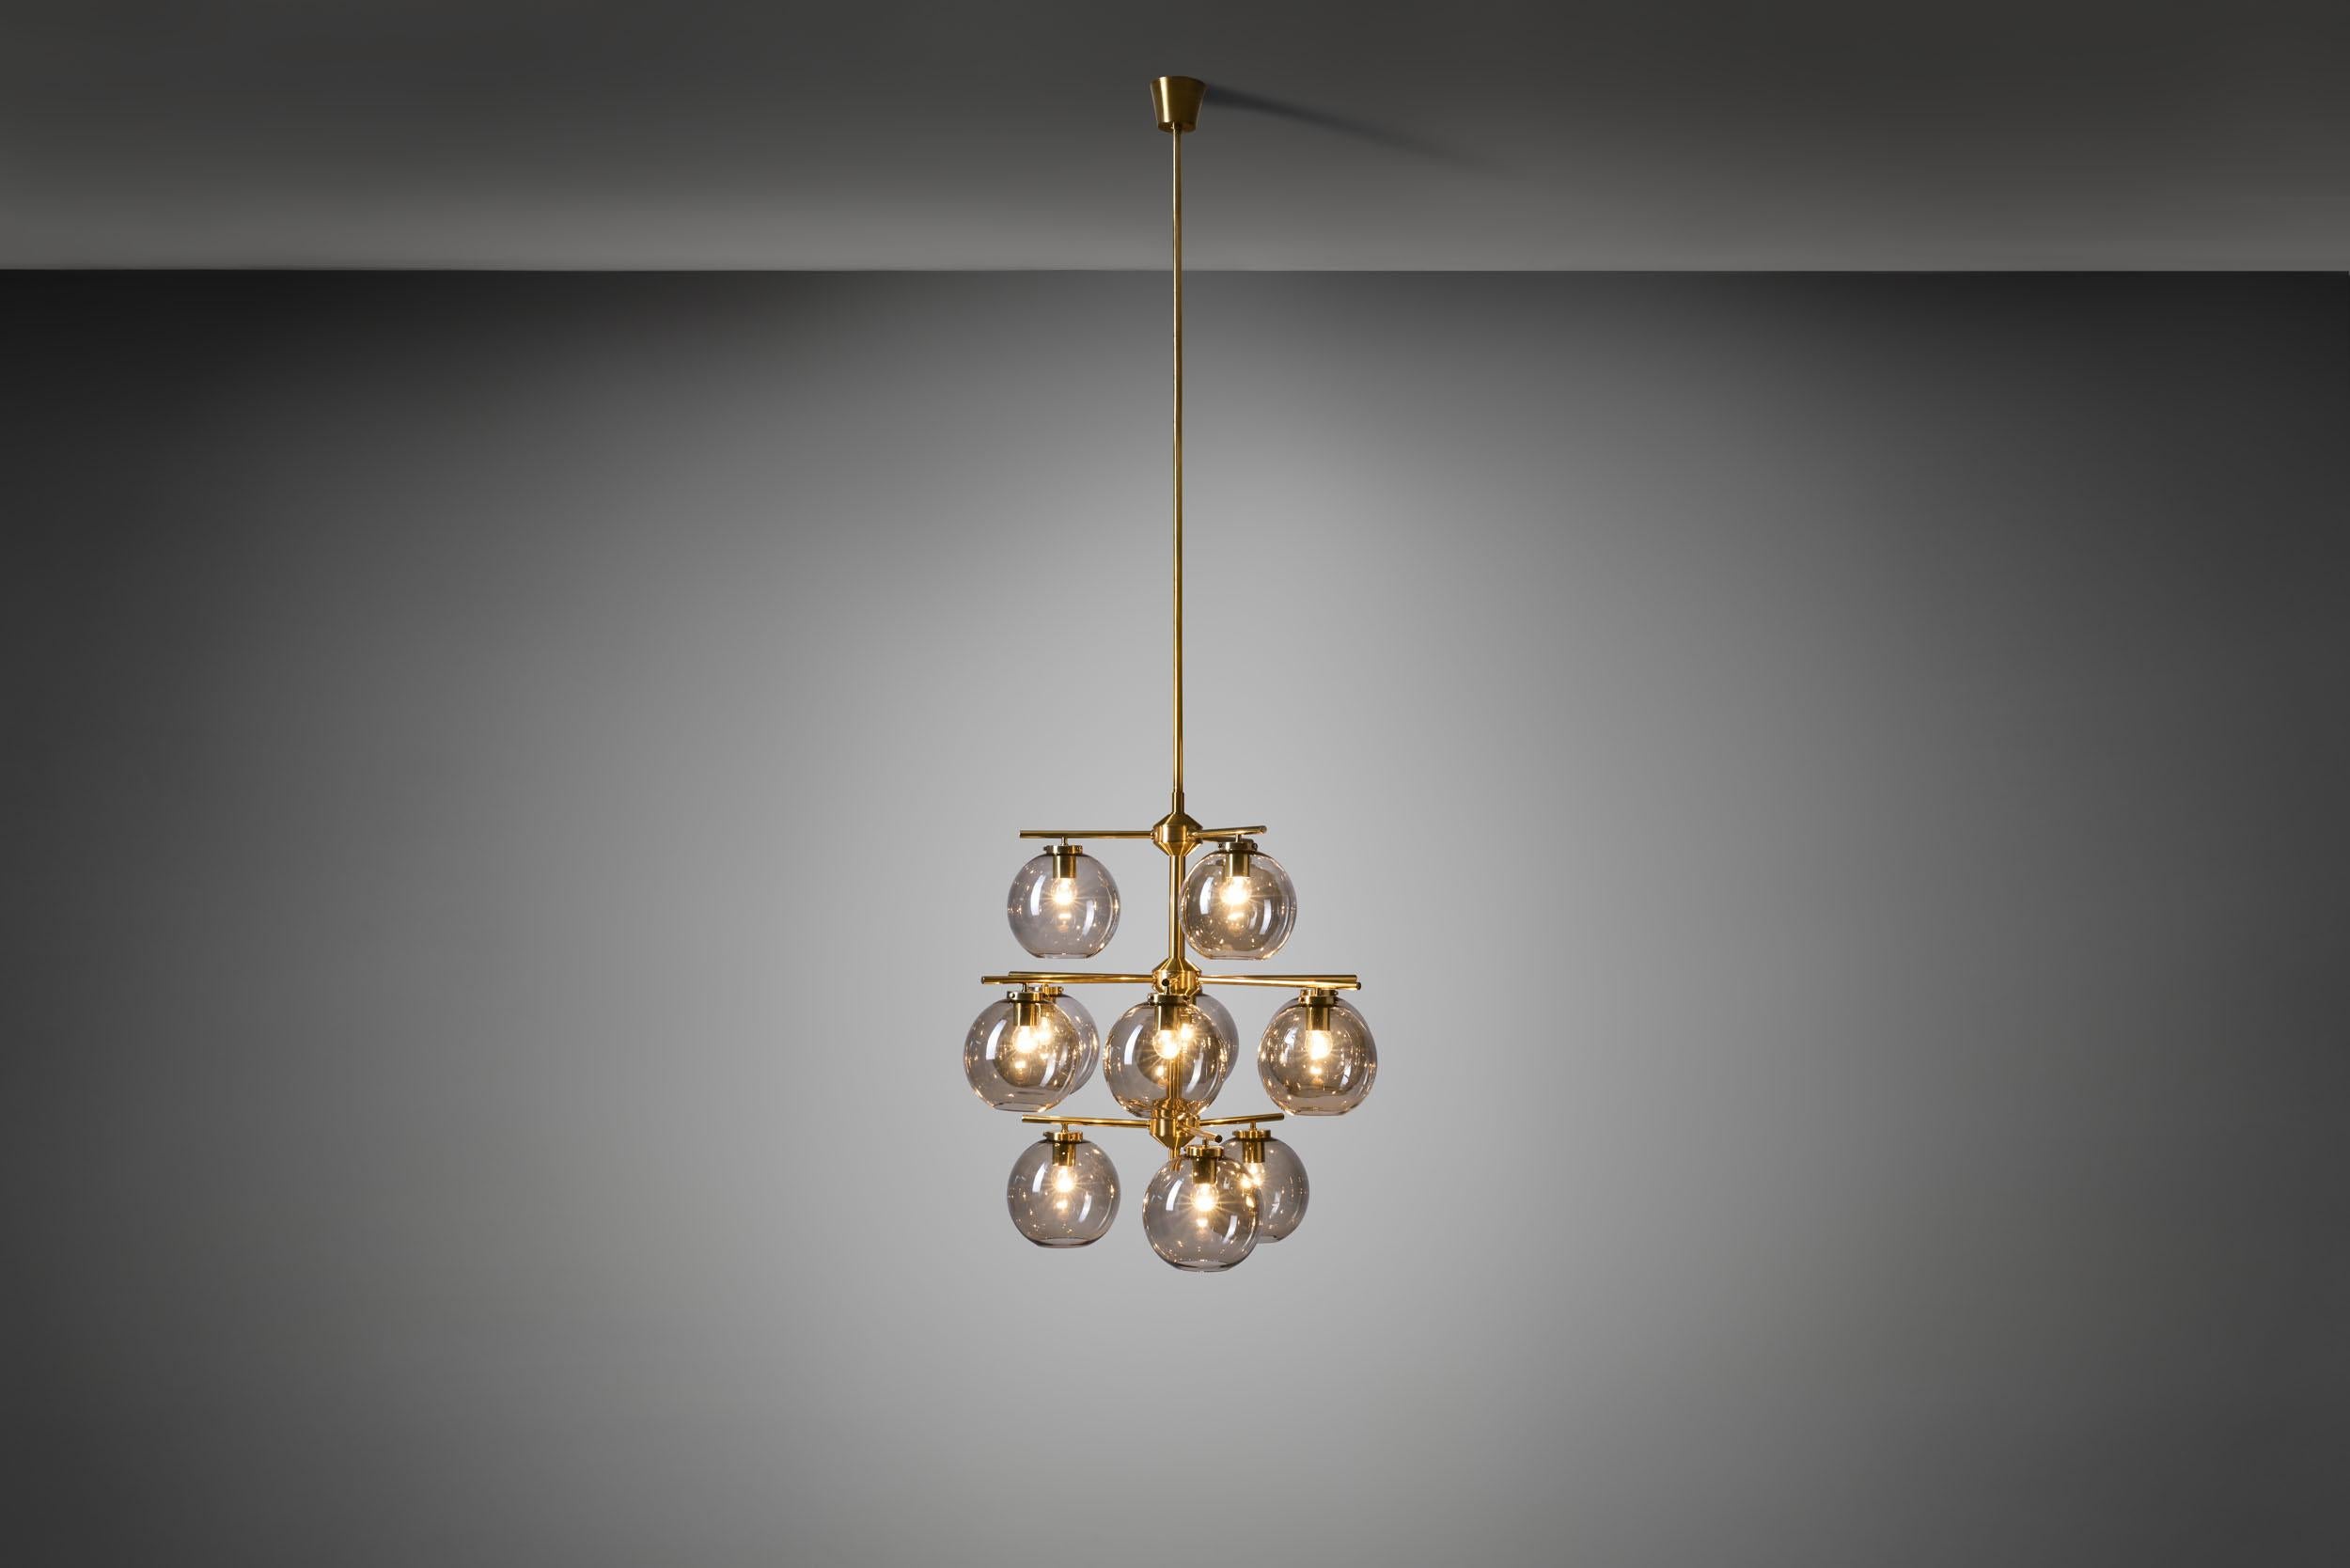 Scandinavian Modern Holger Johansson Chandelier with 12 Smoked Glass Shades for Westal, Sweden 1960s